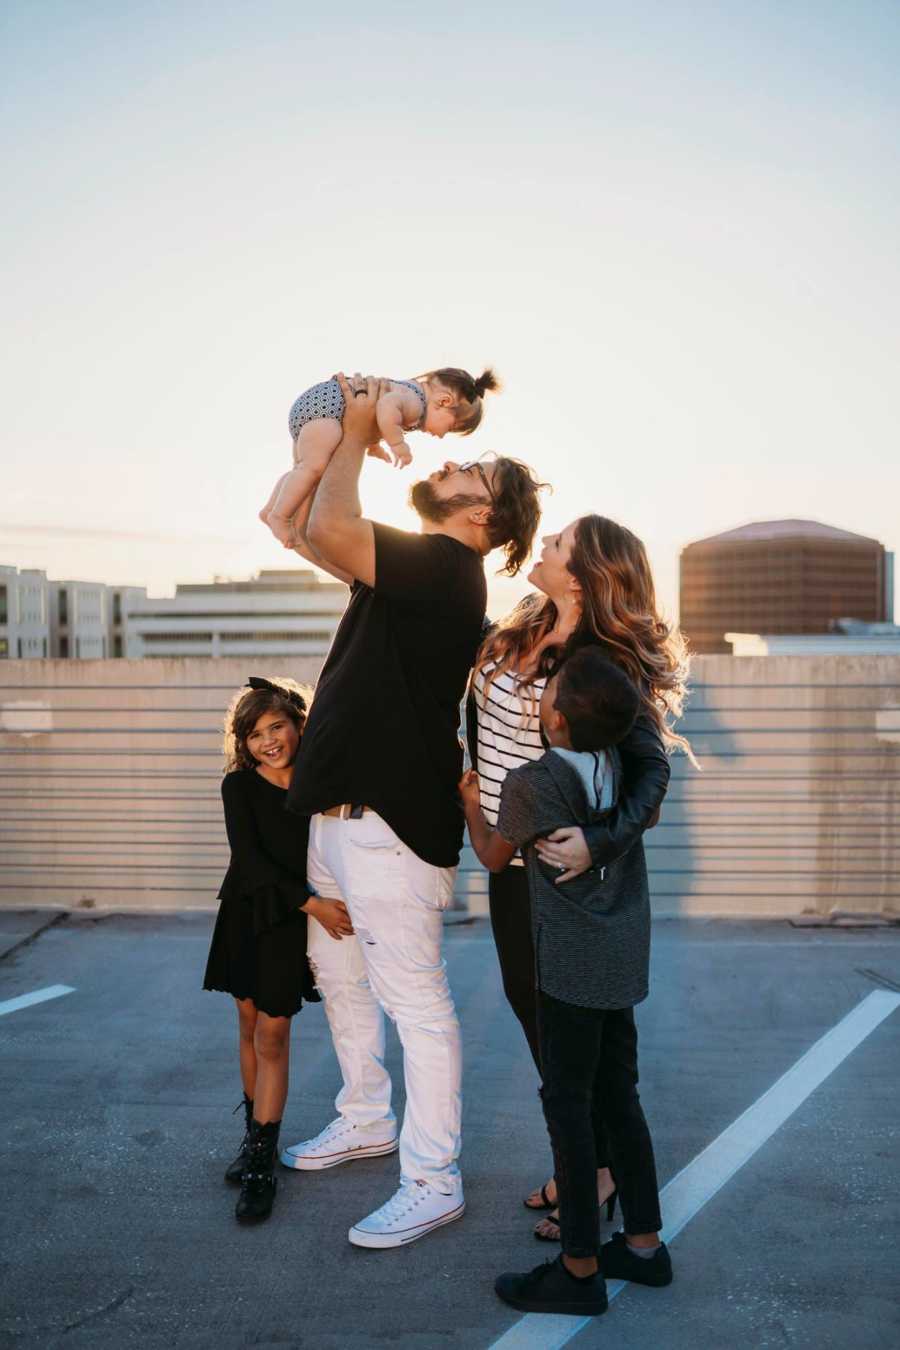 Woman stands with her son beside her boyfriend who is holding up his daughter beside her daughter